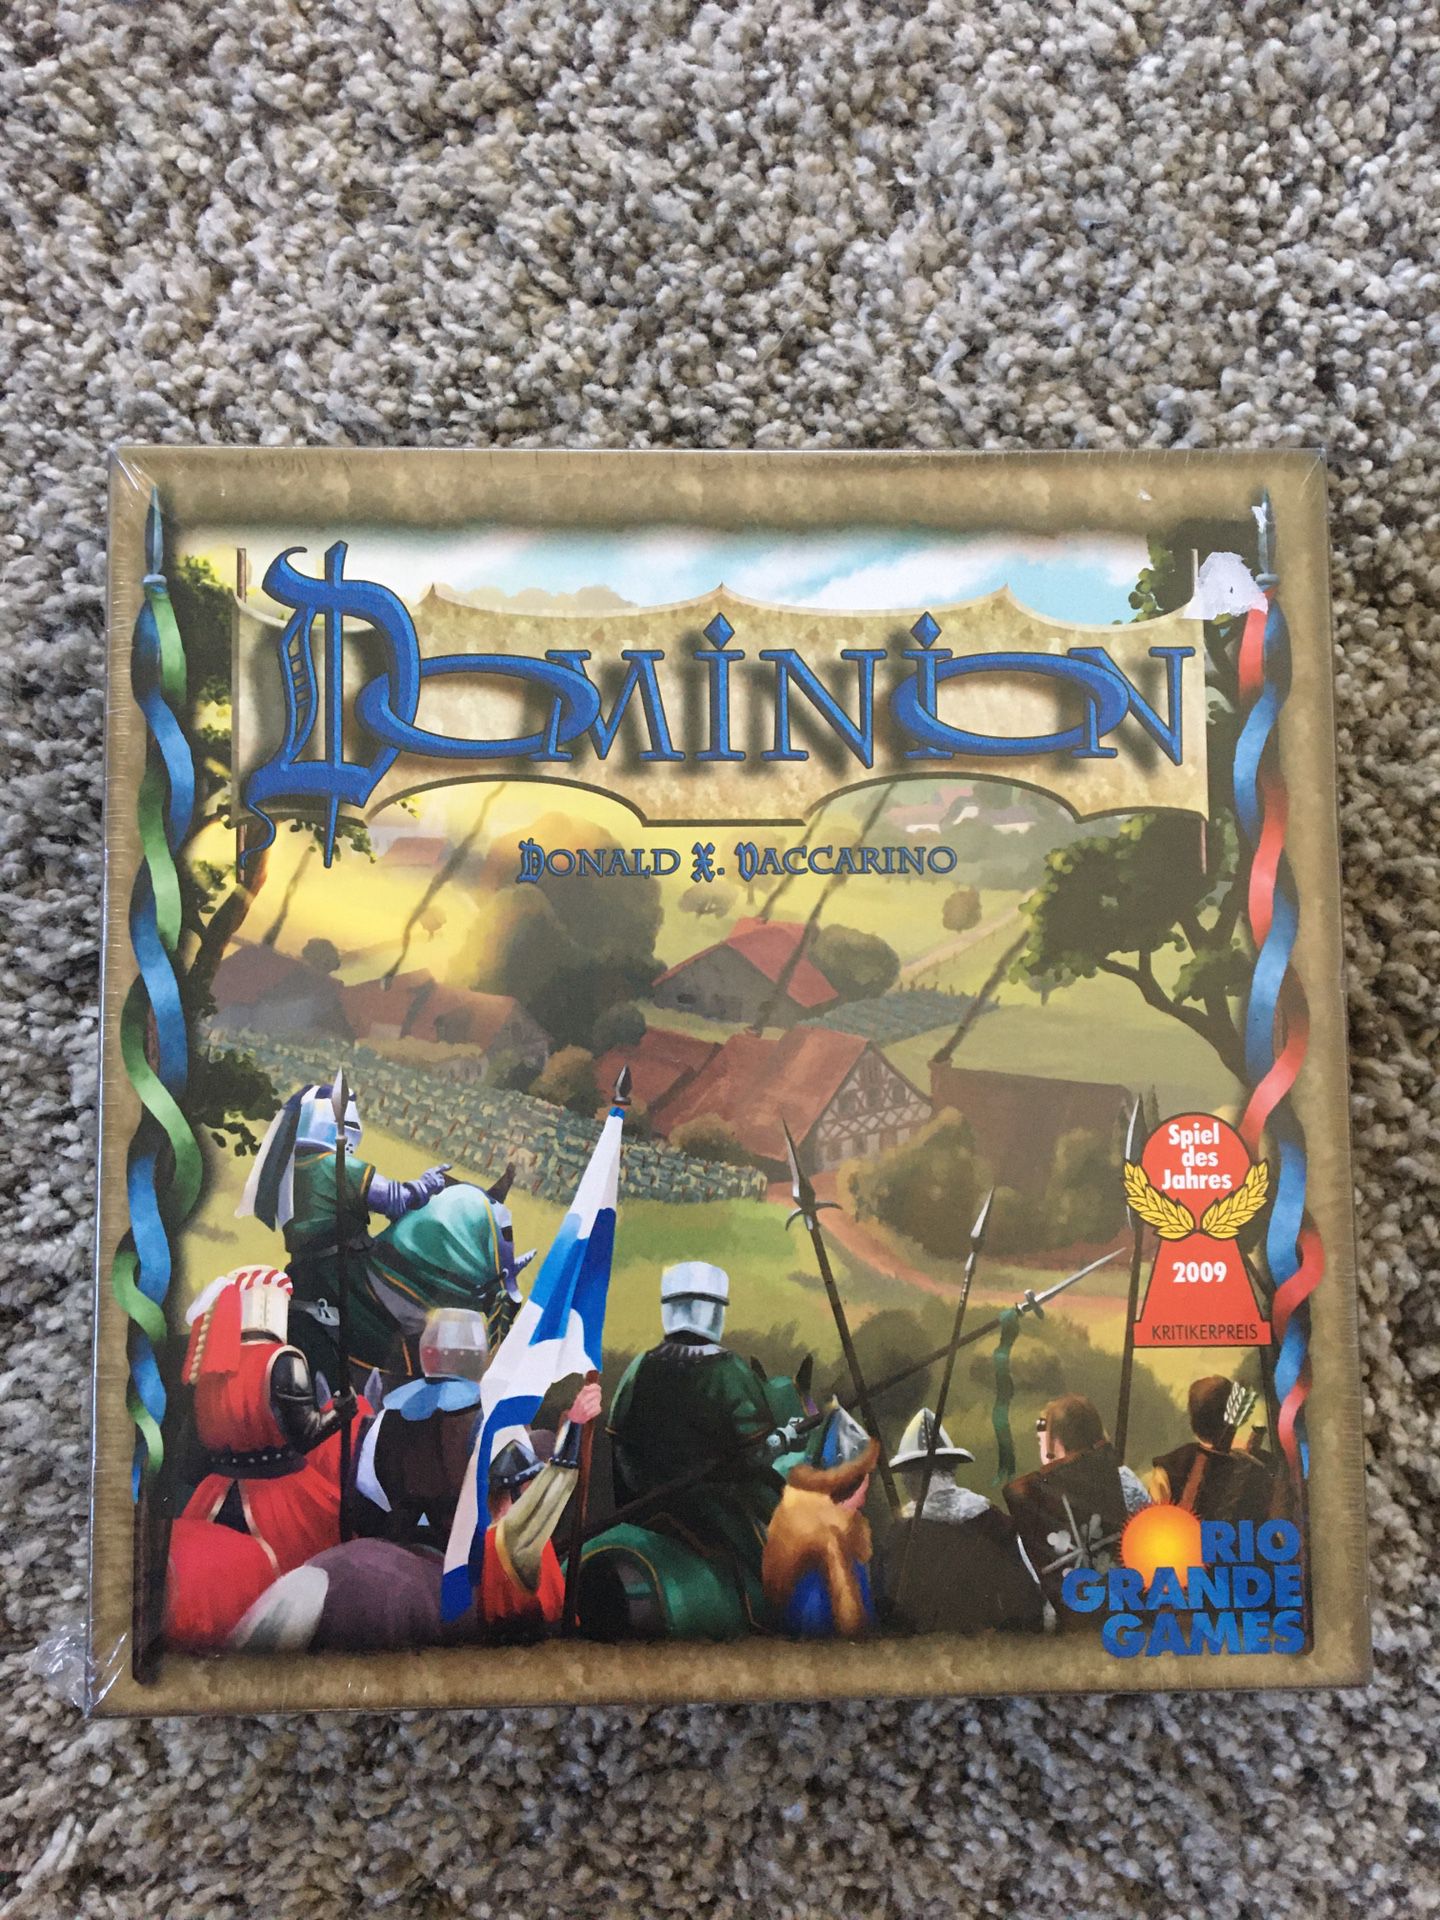 Dominion Board Game - new in shrink